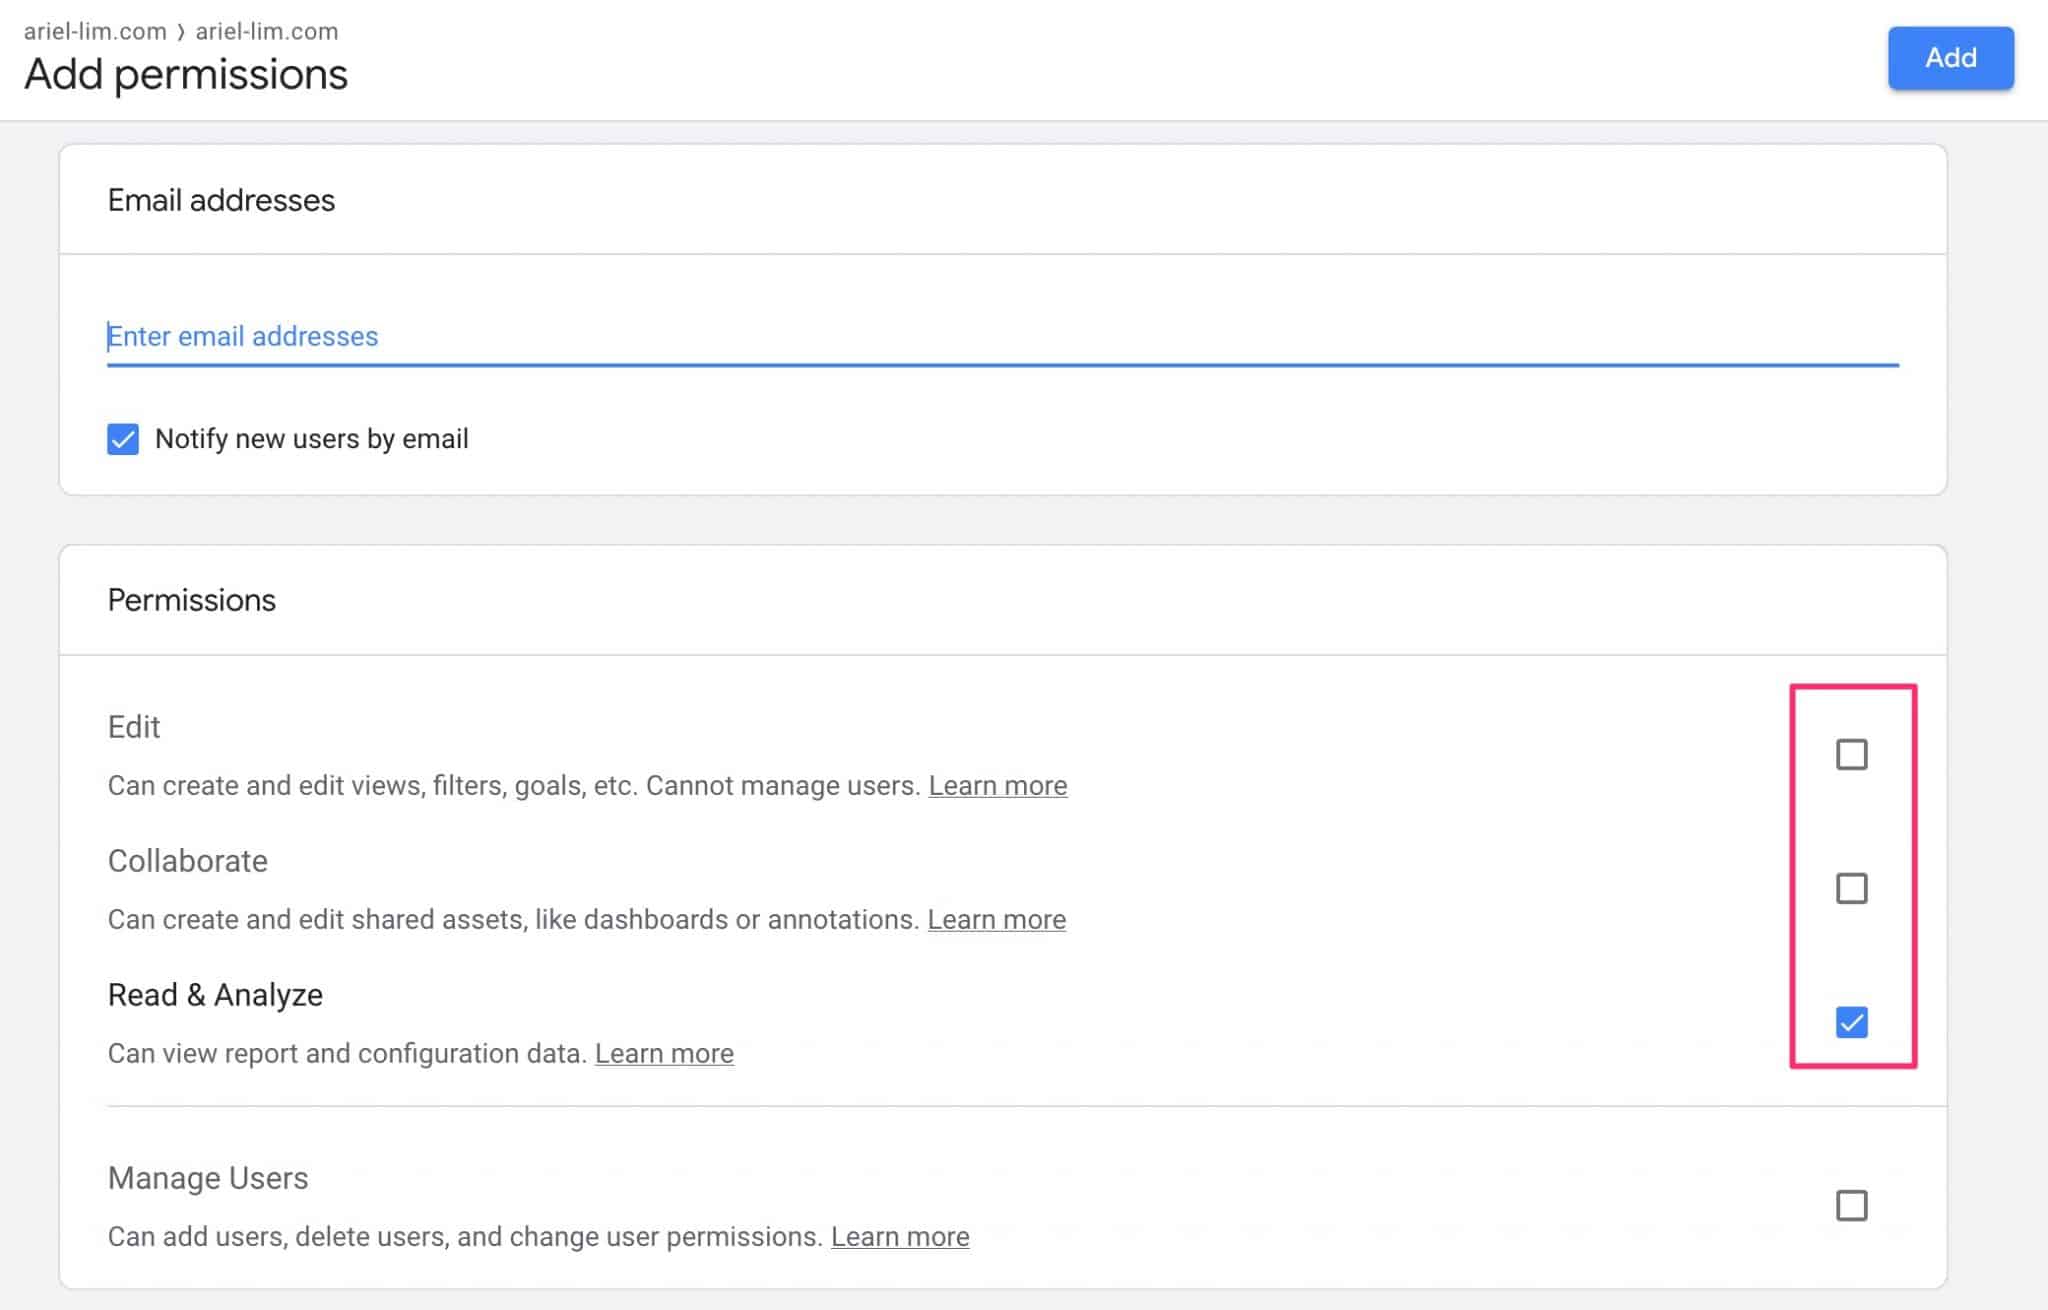 Add permissions to user in Google Analytics